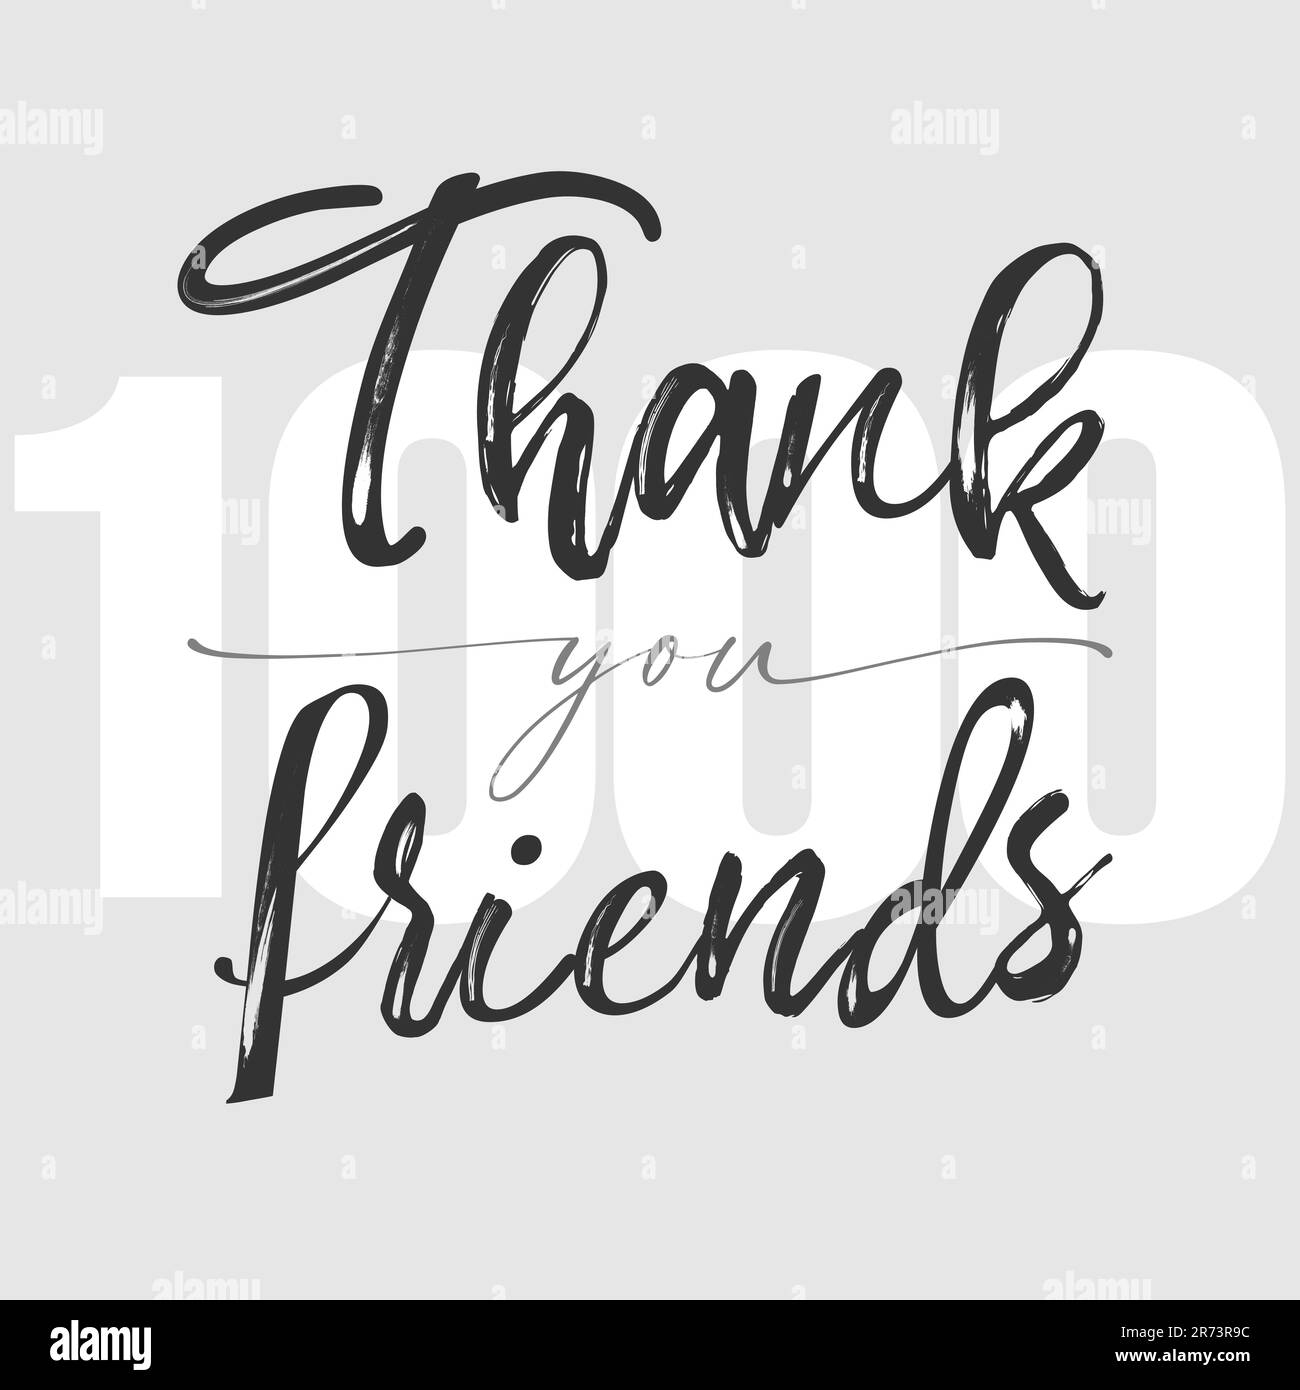 Thank you 1000 friends. Promotion poster. Thanks card for social media subscribers or network followers. Black and white graphic style. 1 000 web like Stock Vector